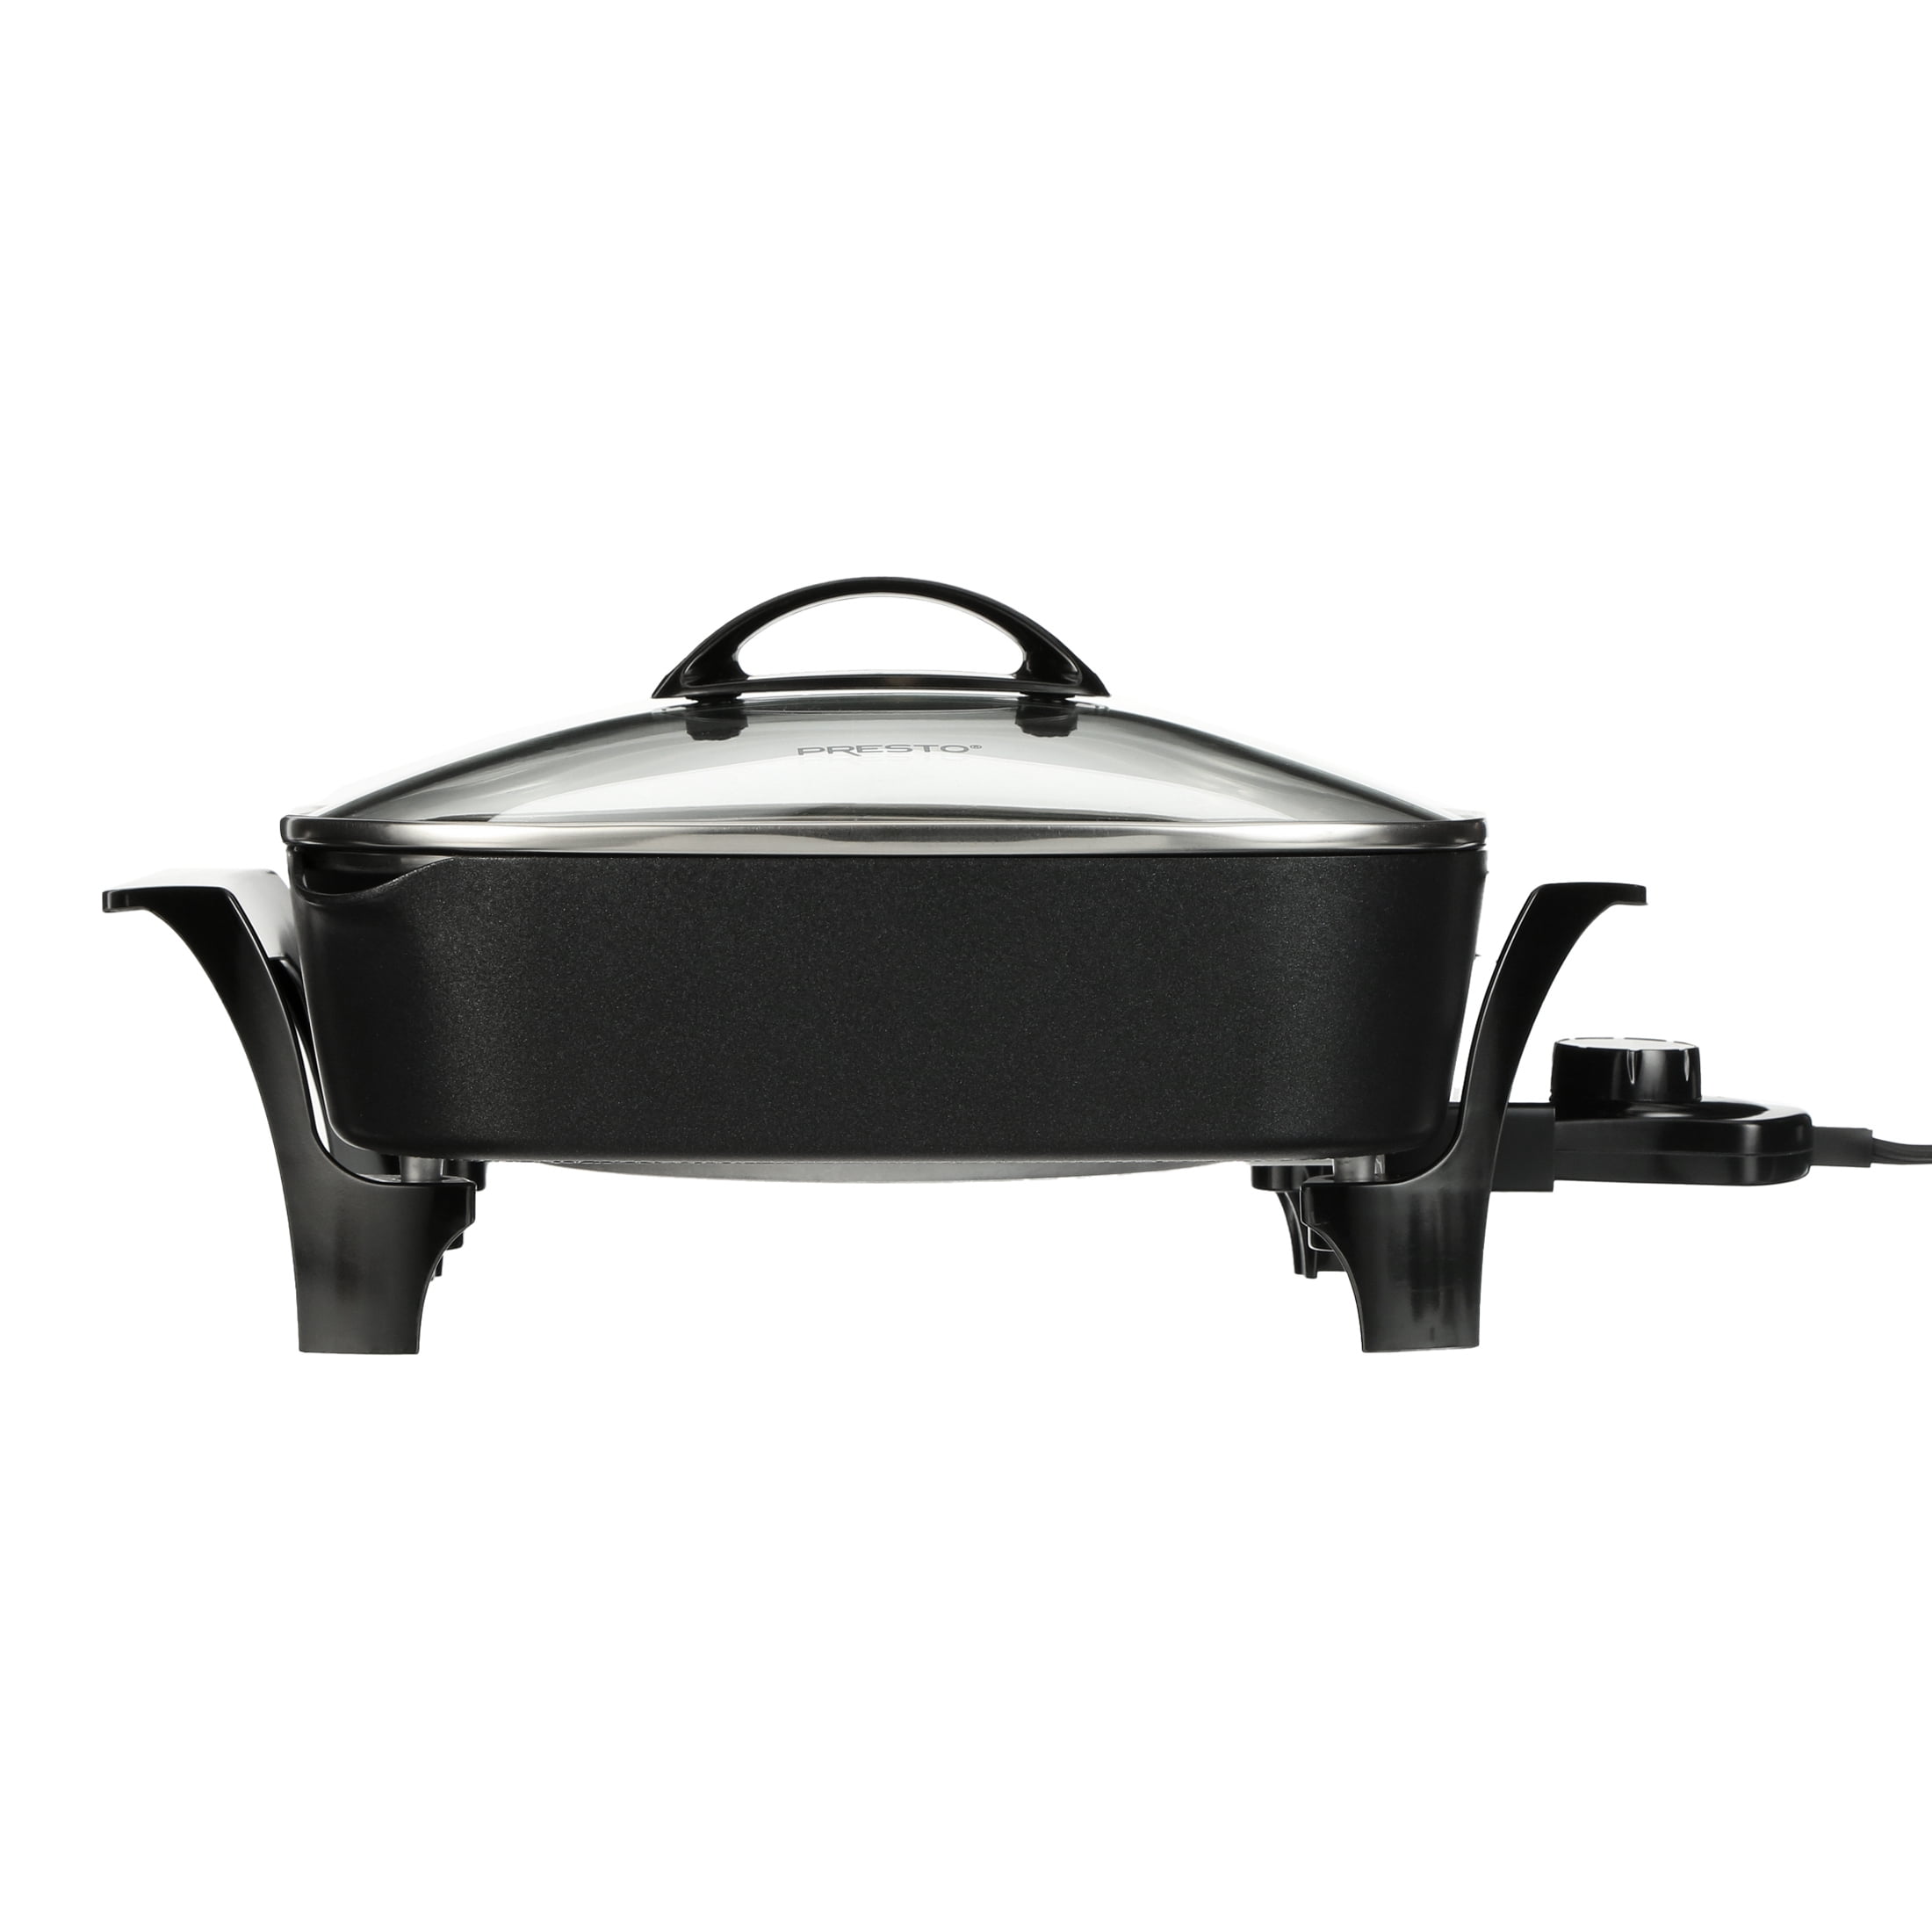 Presto 11 Electric Skillet with Glass Cover - 8907968